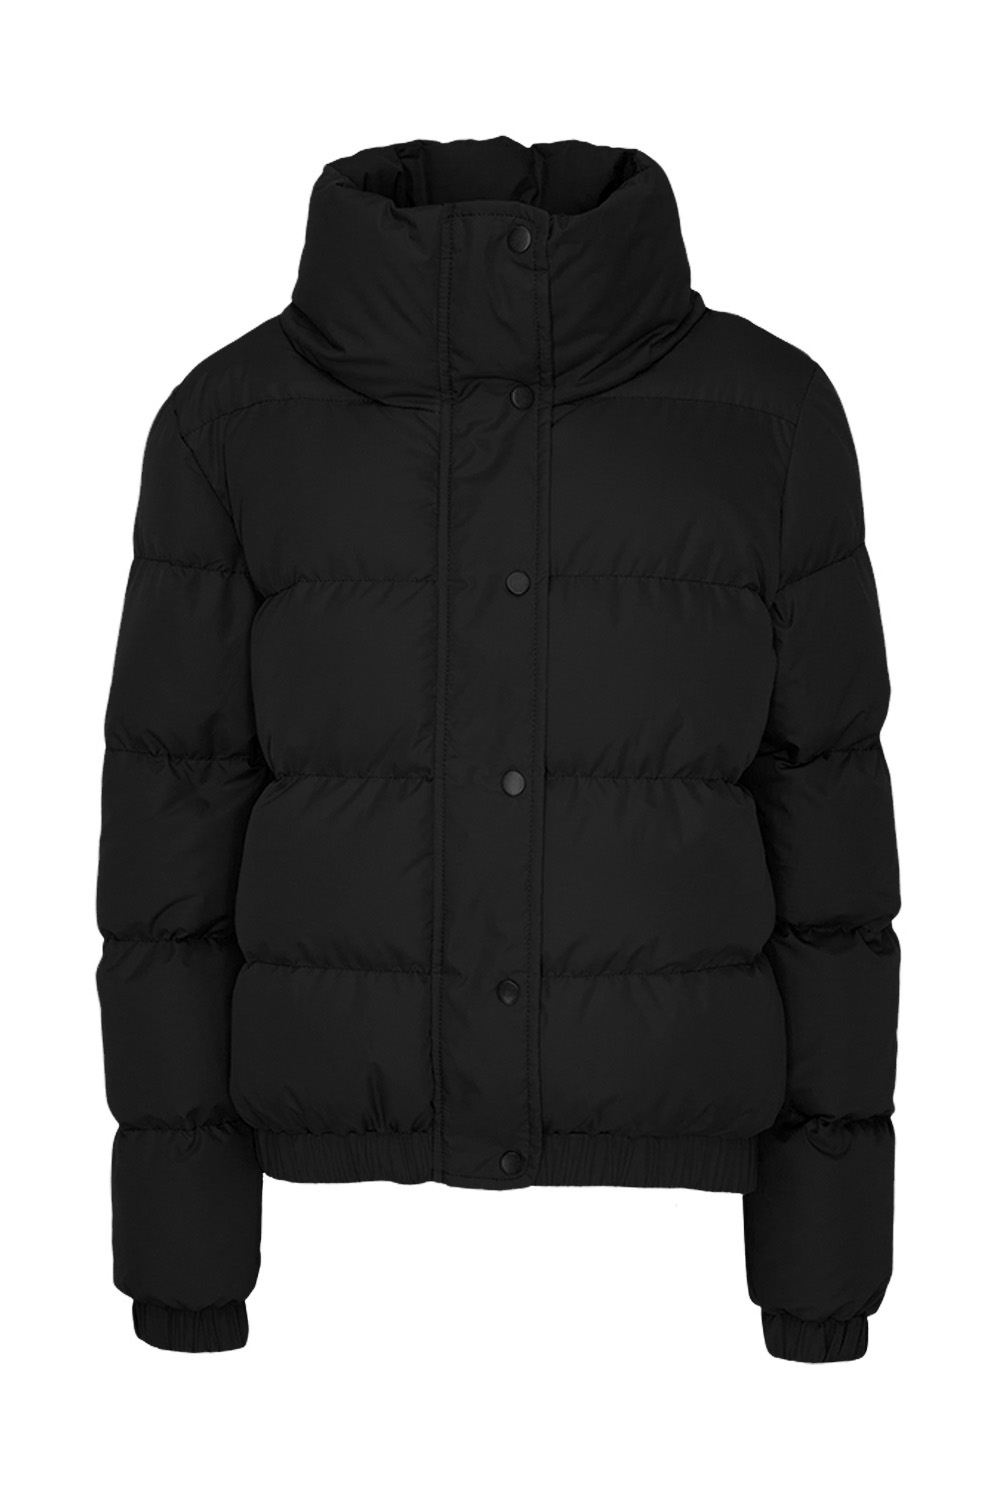 Brave Soul Womens Slay Puffer Padded Quilted Bomber Jacket Ladies ...